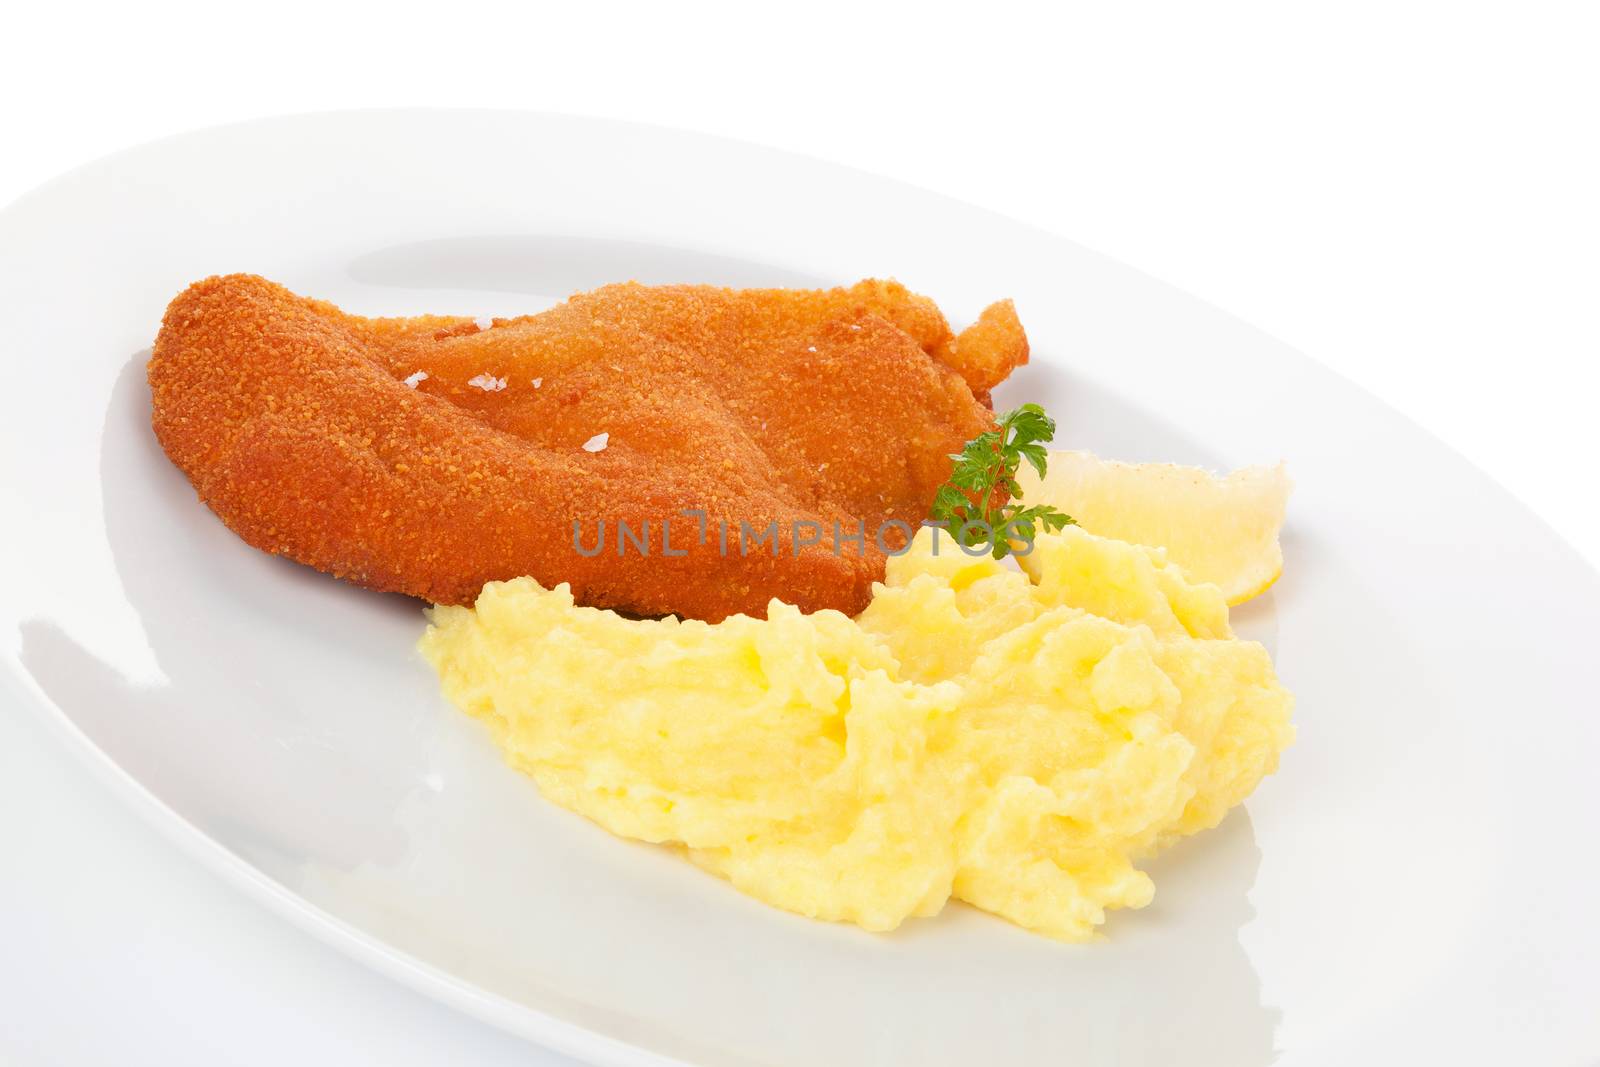 Delicious wiener schnitzel with mashed potatoes on plate on white background. Traditional european cuisine.